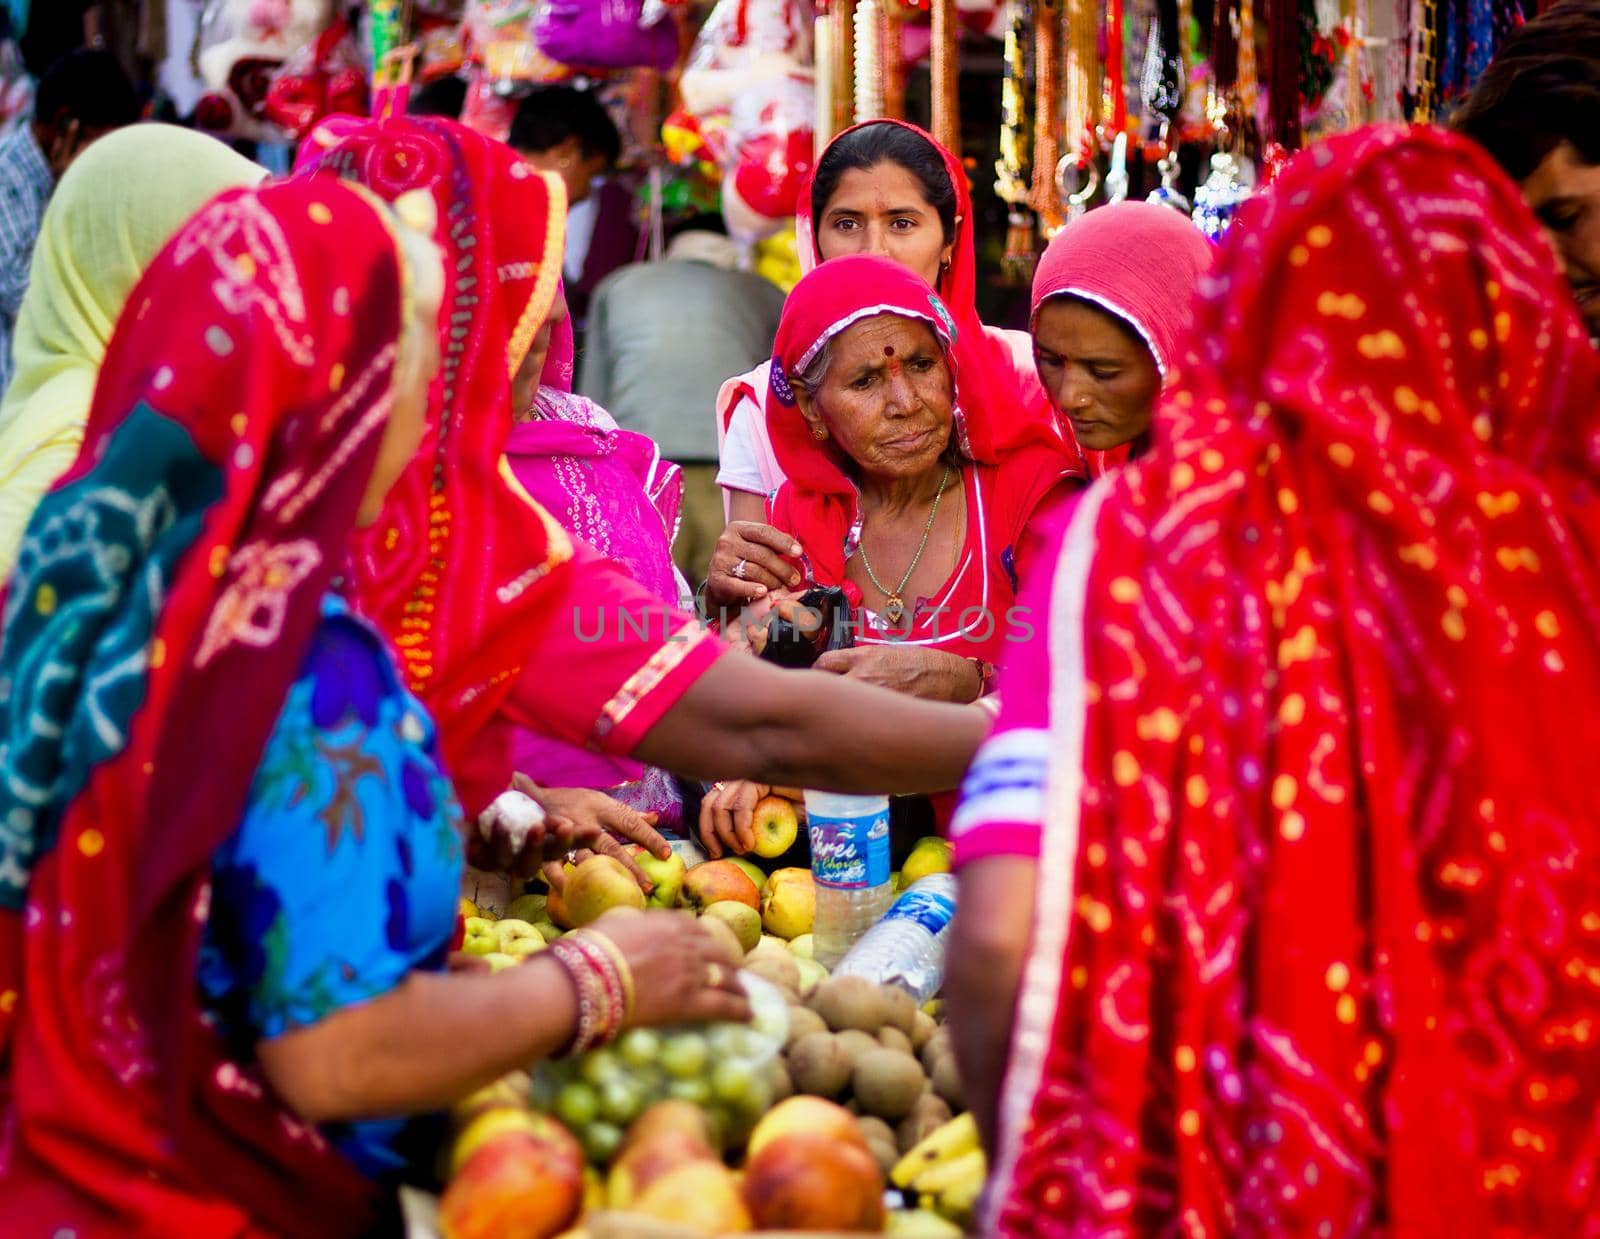 Pushkar, India - November 10, 2016: Few Indian women in colorful saree while covering their head buying fruits in group in the state of Rajasthan